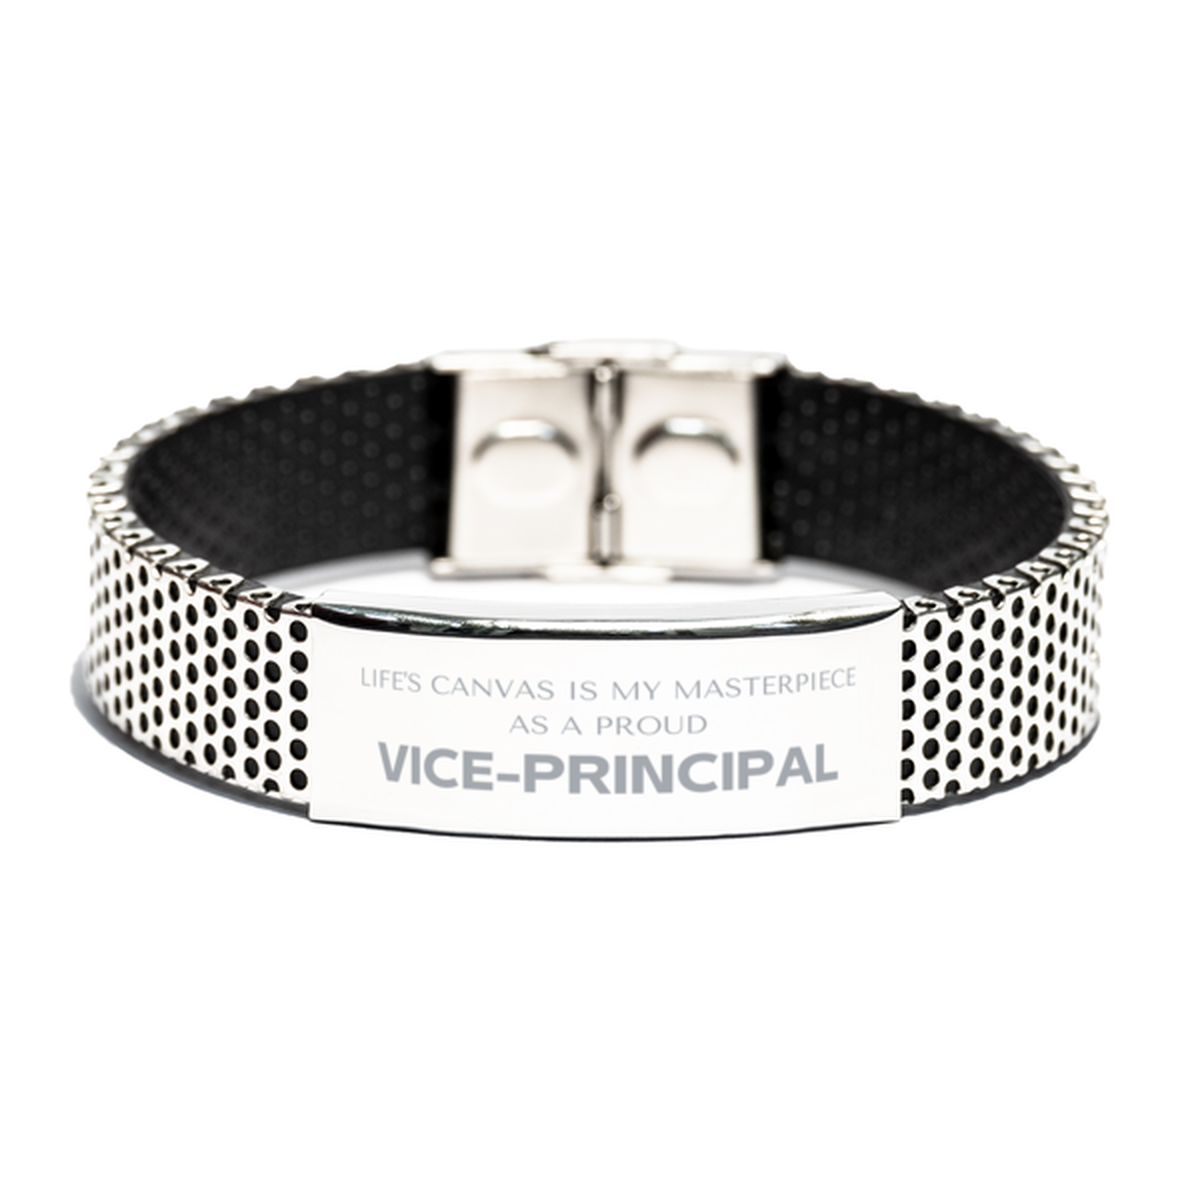 Proud Vice-principal Gifts, Life's canvas is my masterpiece, Epic Birthday Christmas Unique Stainless Steel Bracelet For Vice-principal, Coworkers, Men, Women, Friends